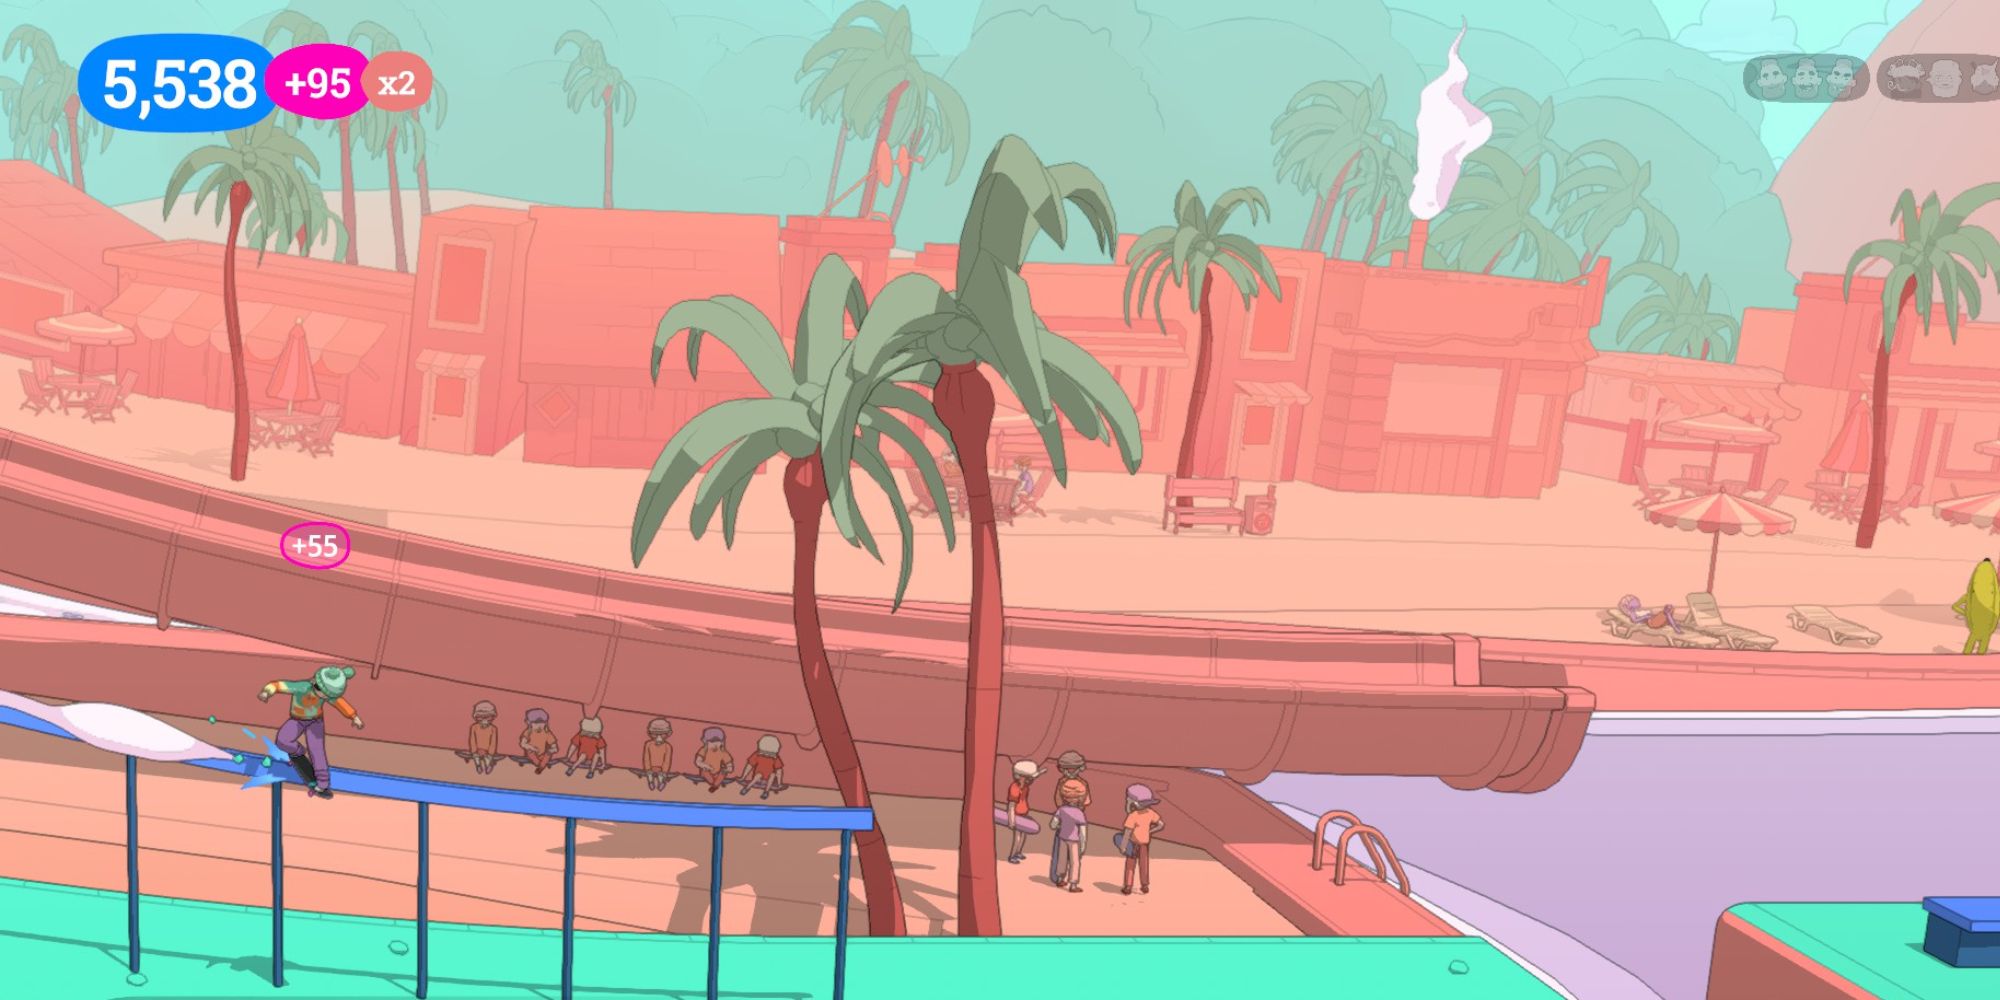 OlliOlli World Levels a wide angle shot of the player grinding across a blue beam in the level Coral Planks towards a palm tree with a group of people standing around and a waterslide in the background